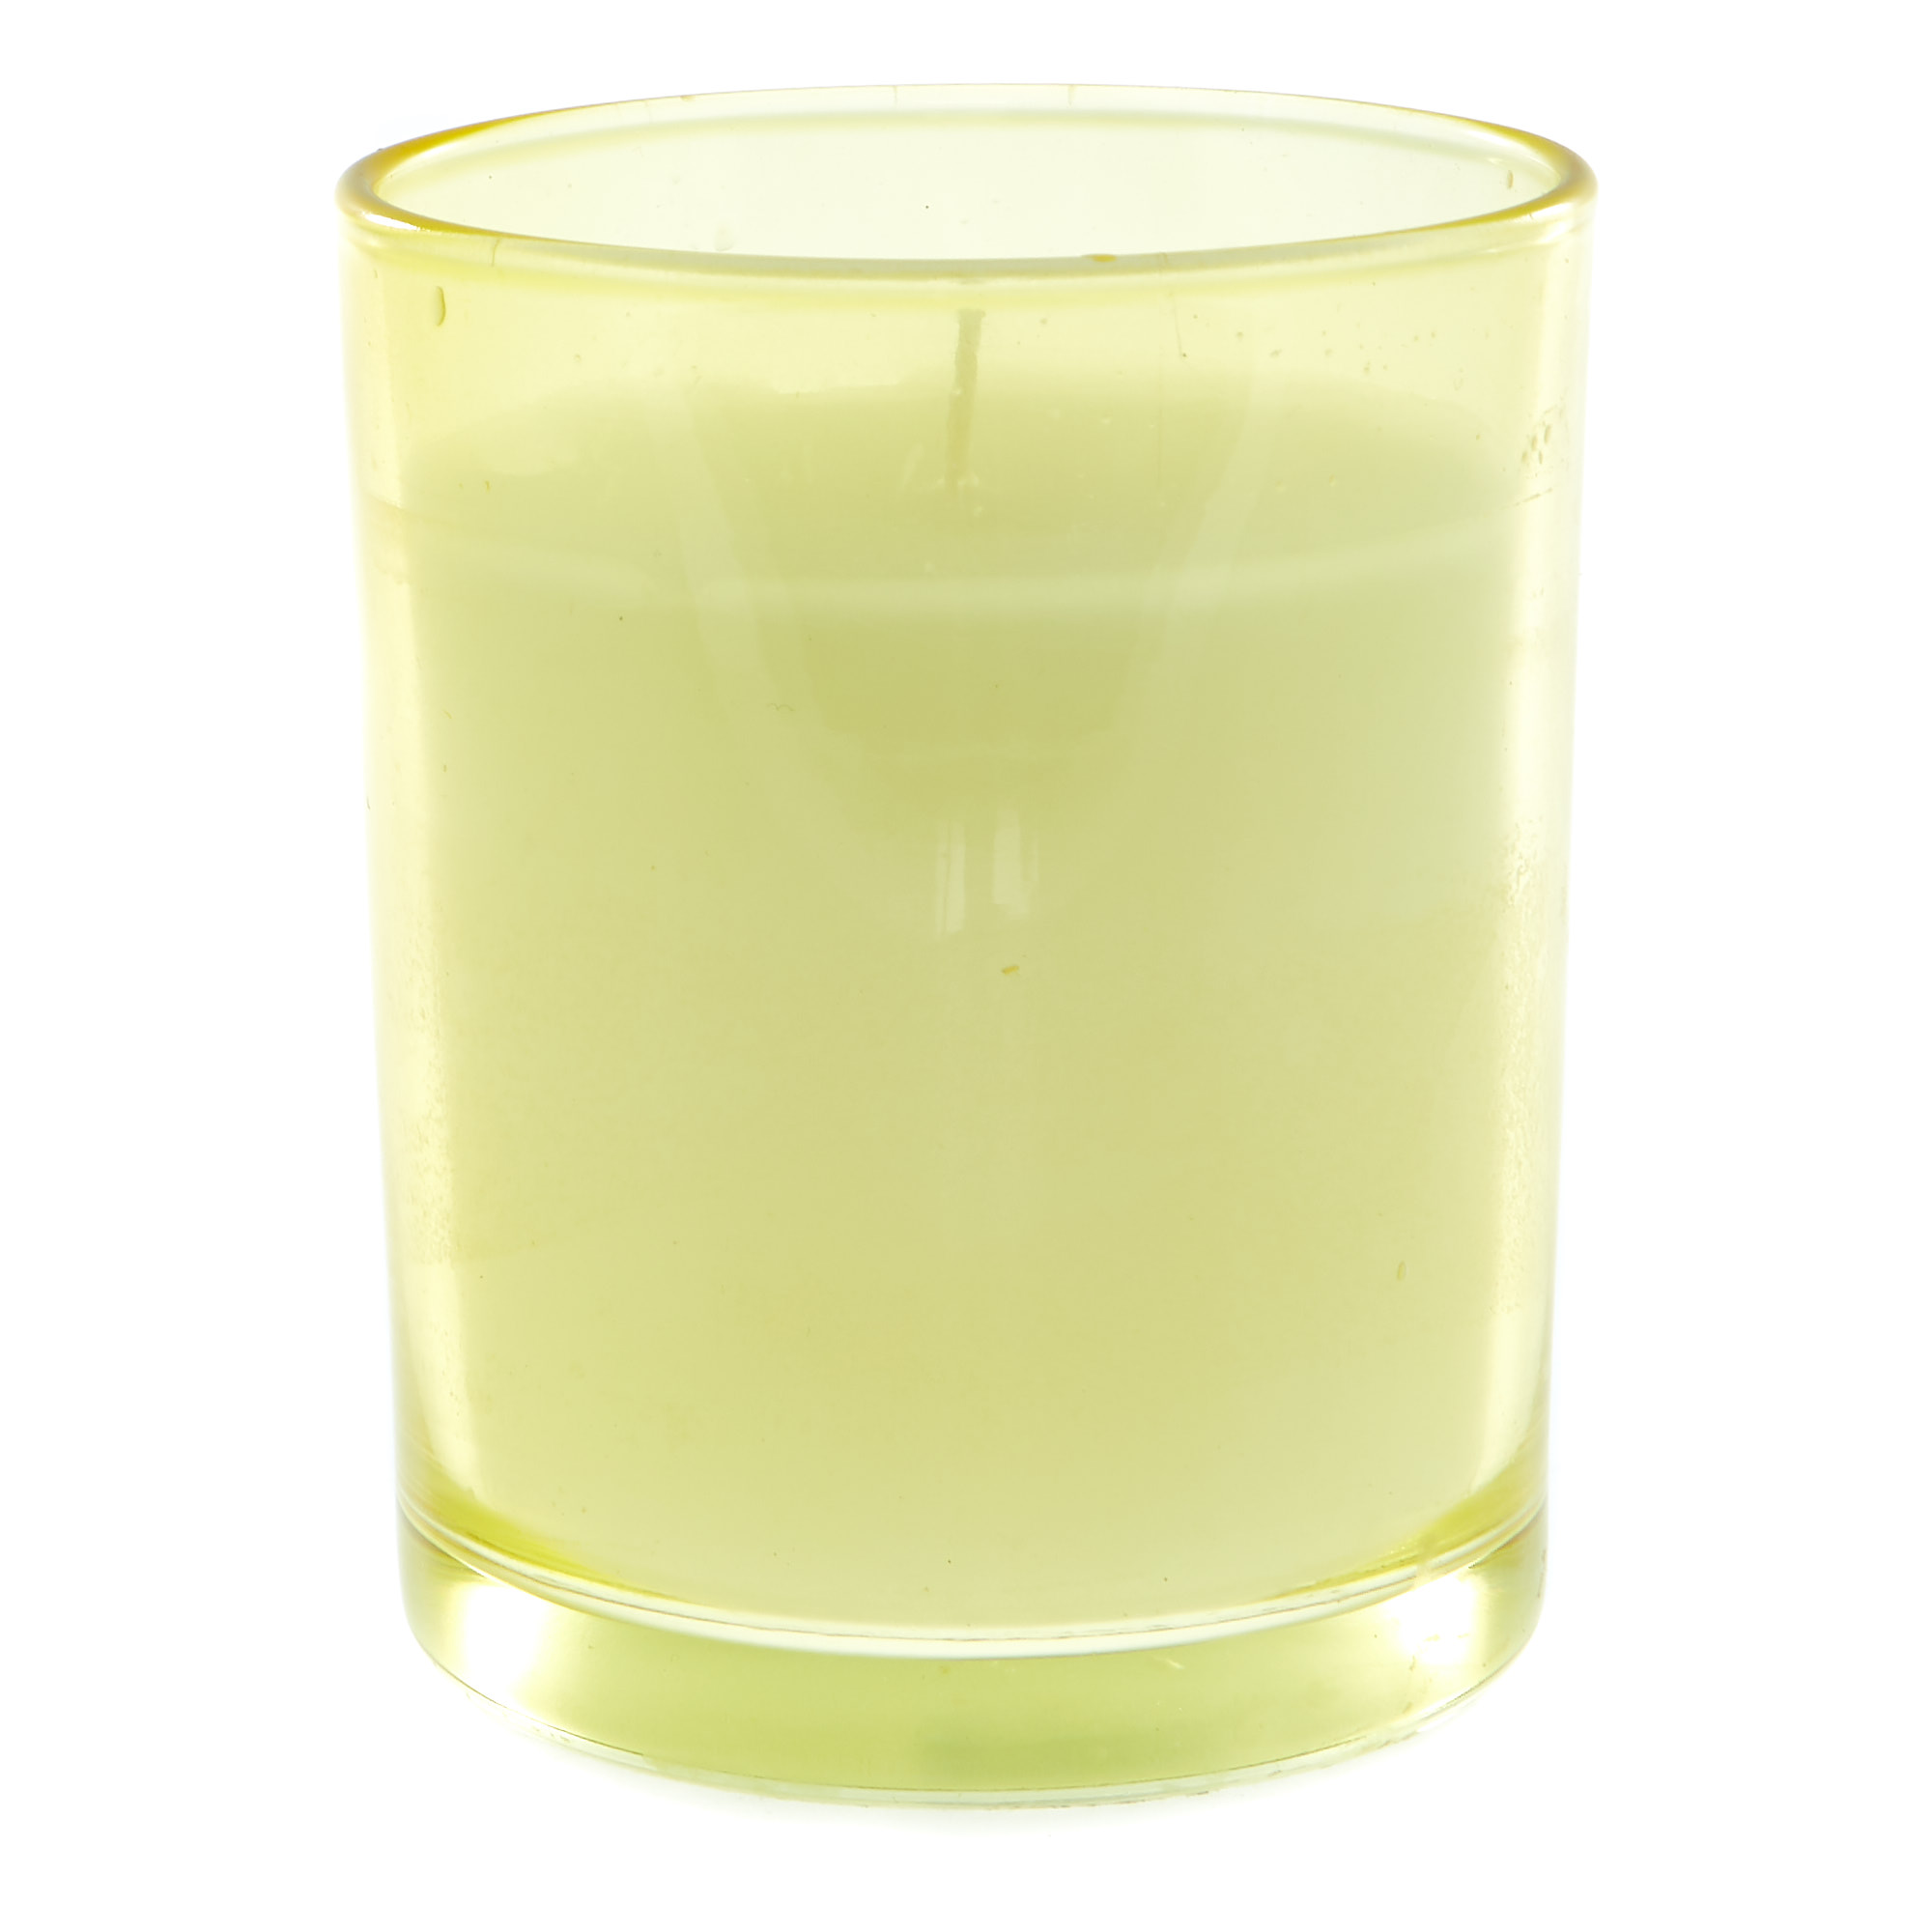 Lemon Drizzle Scented Candle